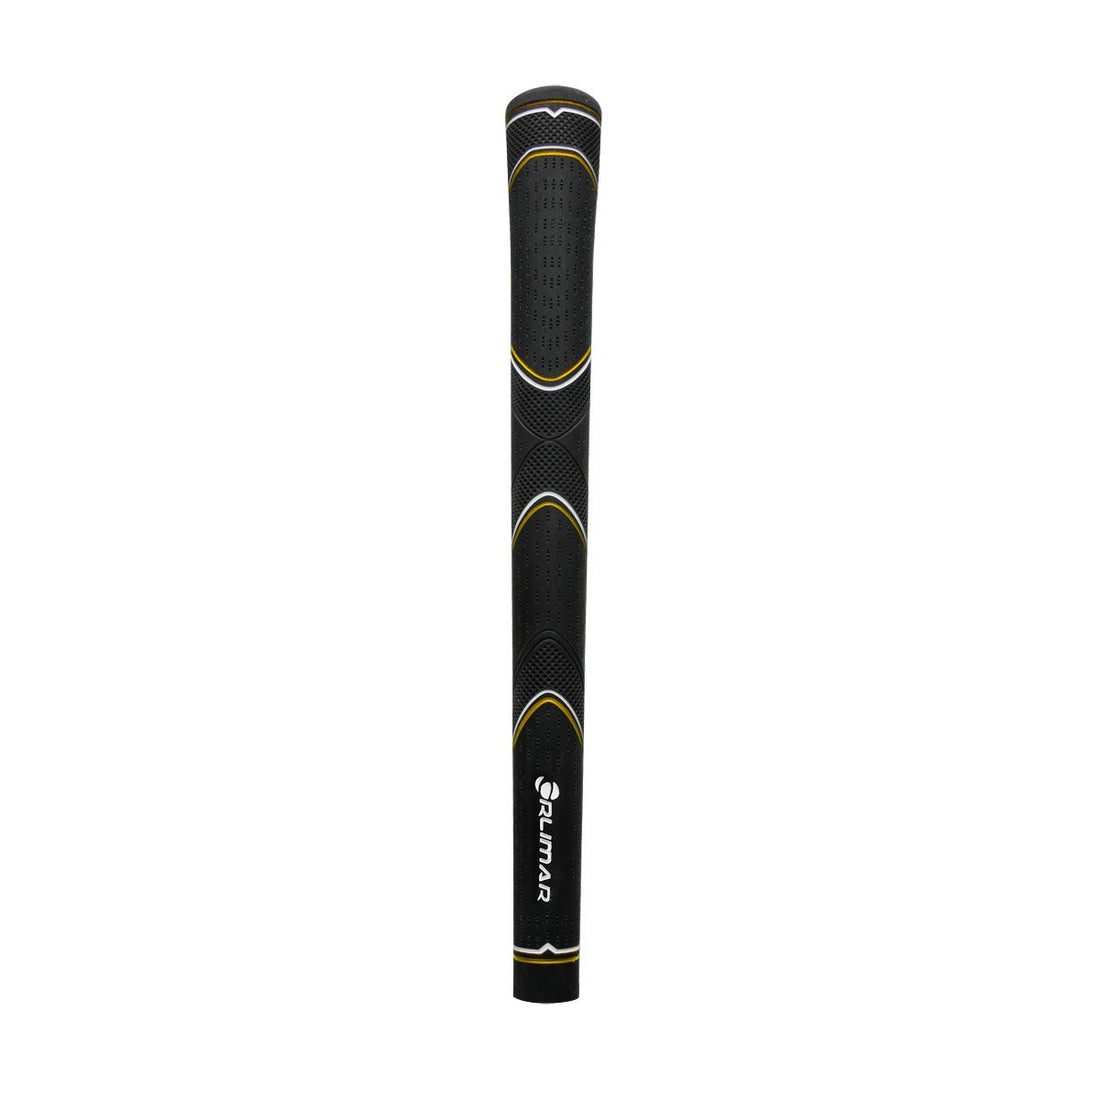 Black Orlimar golf grip with white and gold accent colors